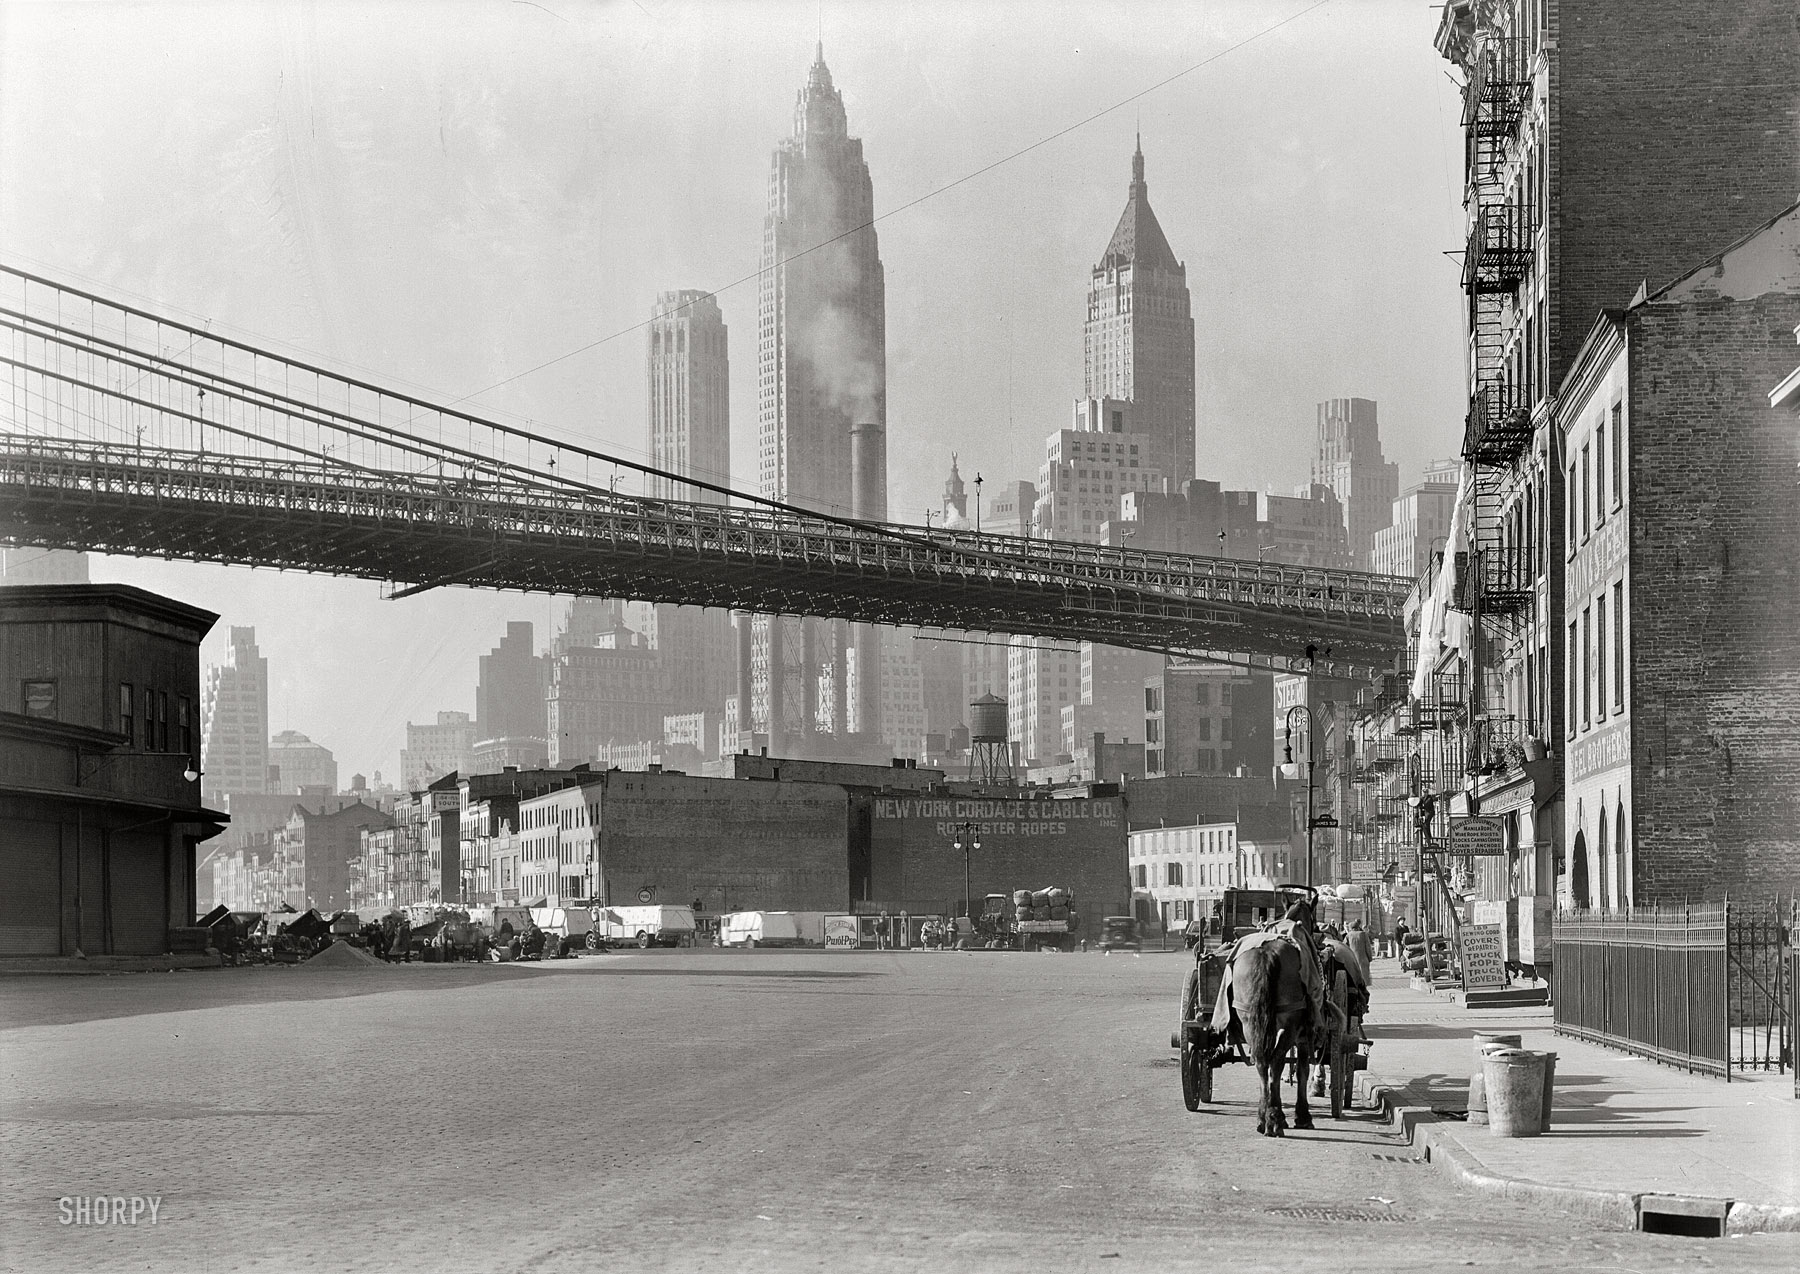 November 28, 1933. "New York City views. Looking down South Street." 5x7 safety negative by Gottscho-Schleisner. View full size.